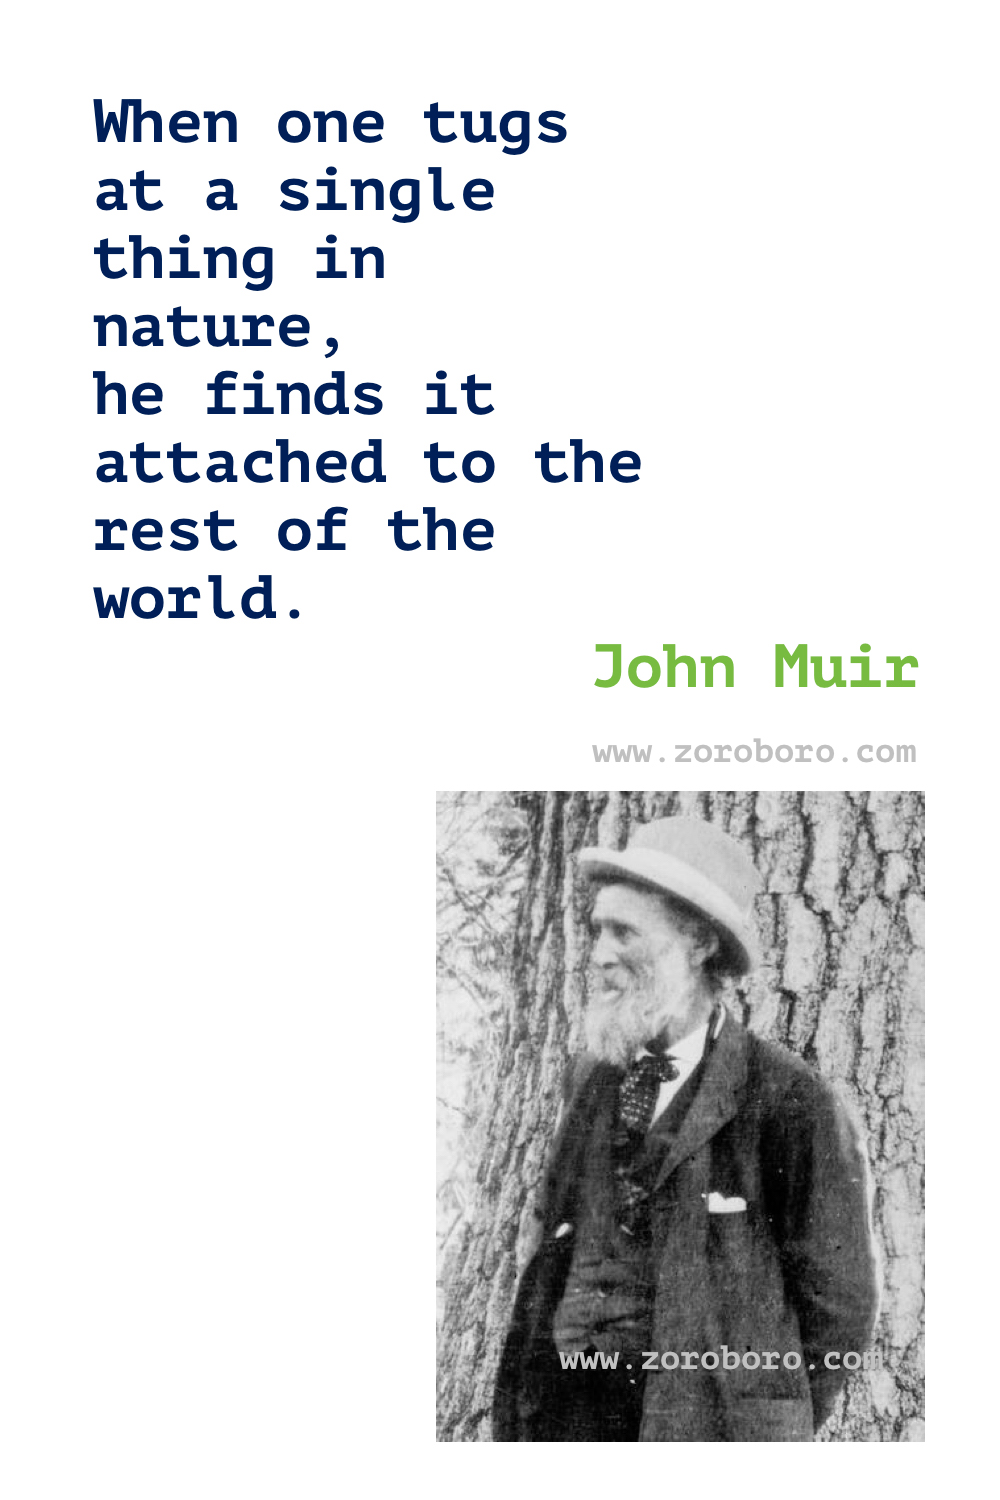 John Muir Quotes. Mountaineer John Muir Quotes. John of the Mountains. Father of the National Parks. John Muir Quotes